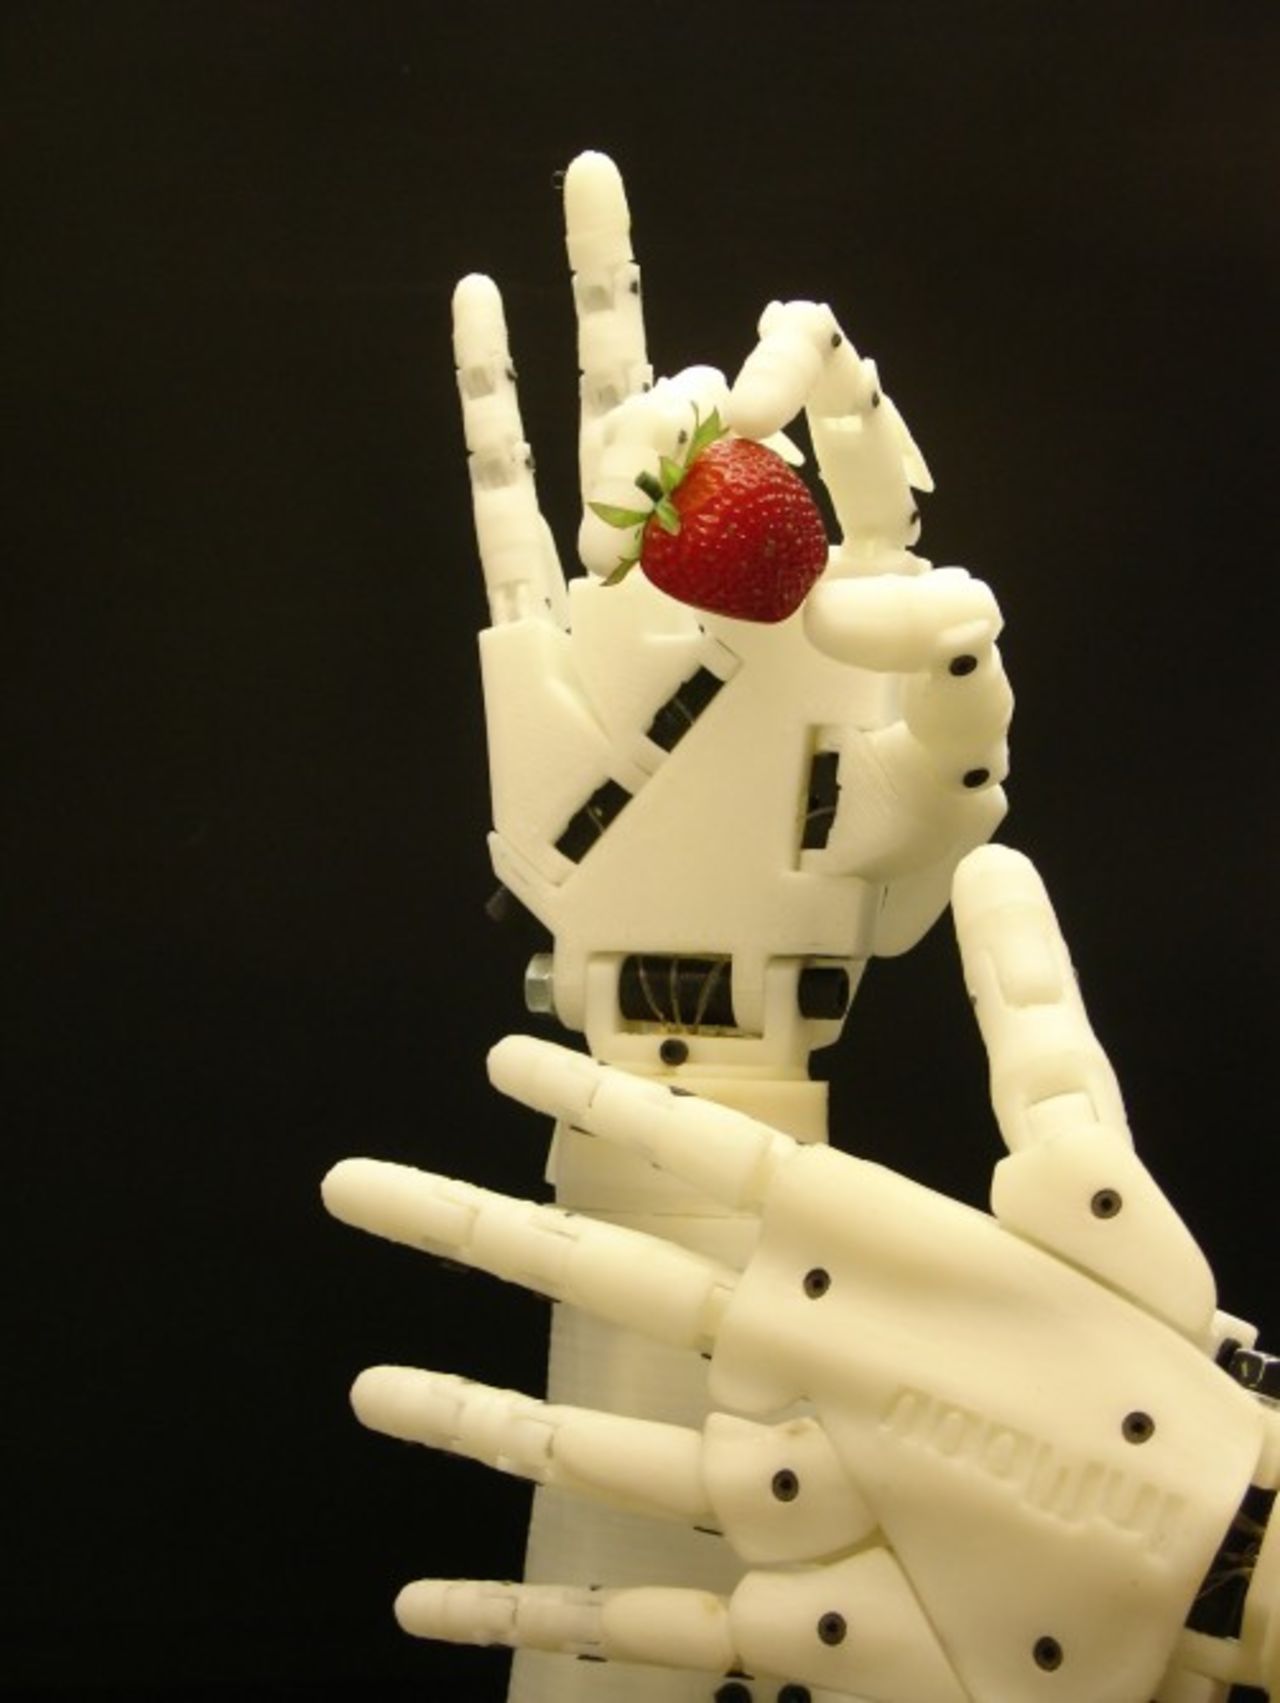 InMoov's hands now have fully articulated fingers and silicone padding to help it grasp objects. 